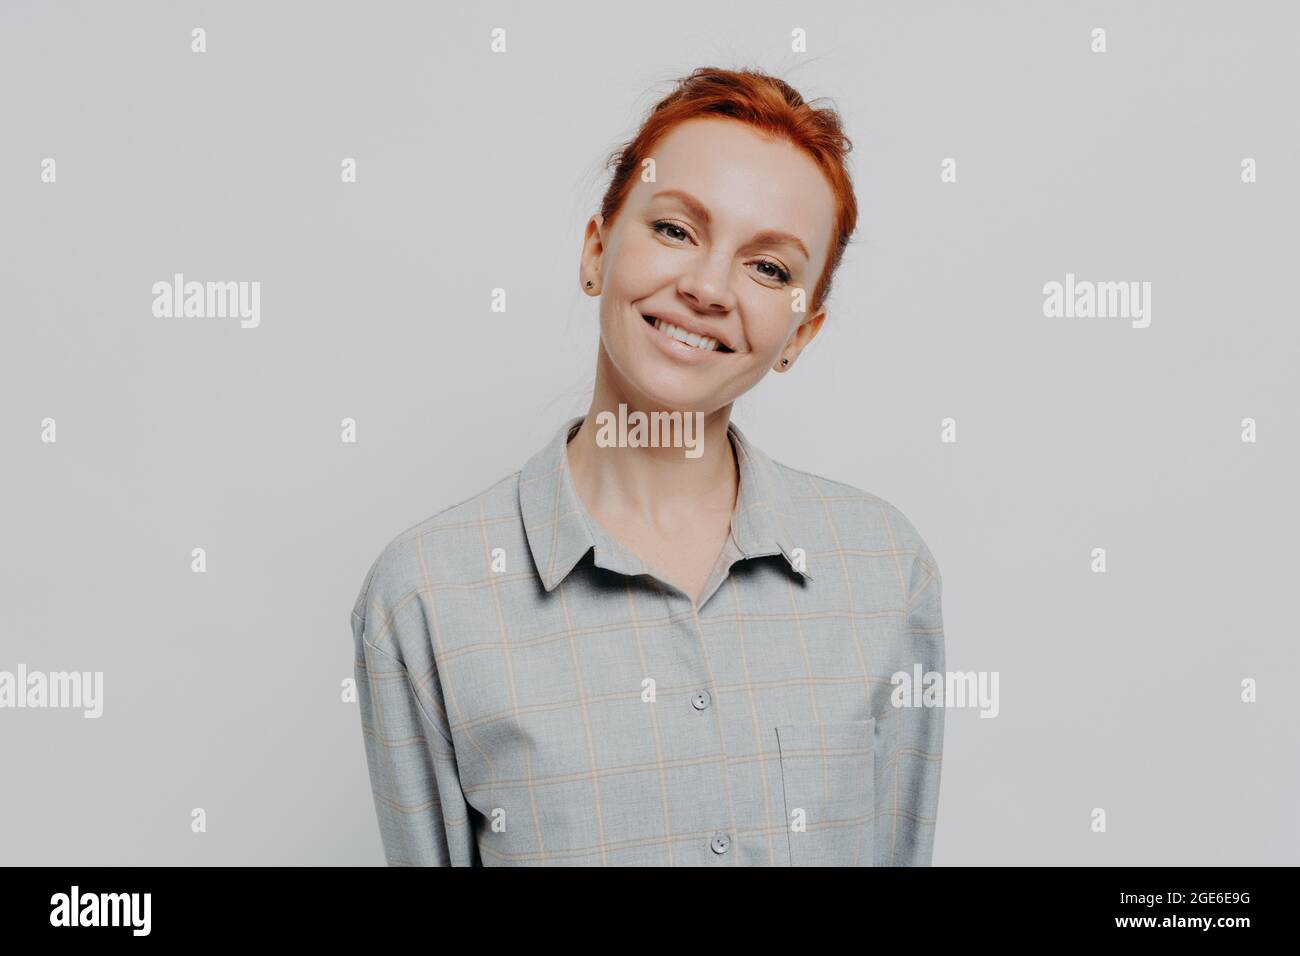 Cheerful beautiful red haired woman with beaming smile posing isolated on grey studio background Stock Photo